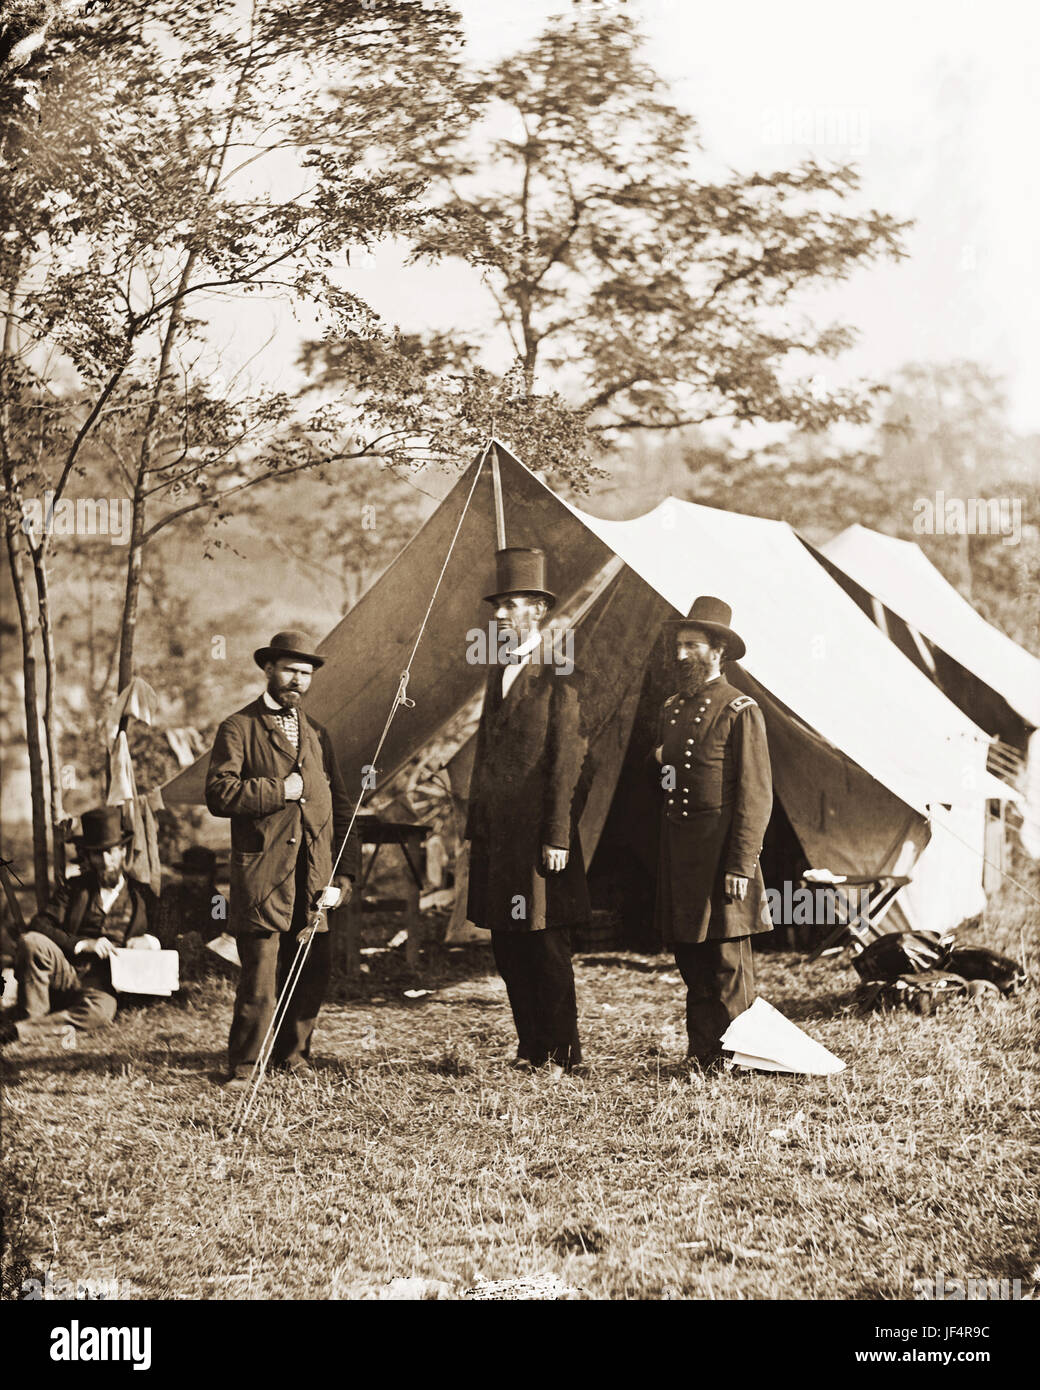 Antietam, Md. - Allan Pinkerton, President Abraham Lincoln, and Maj. Gen. John A. McClernand Photograph from the main eastern theater of the war, Battle of Antietam, September-October 1862. CREATED/PUBLISHED:  1862 October 3. CREATOR: Gardner, Alexander, 1821-1882, photographer. Stock Photo